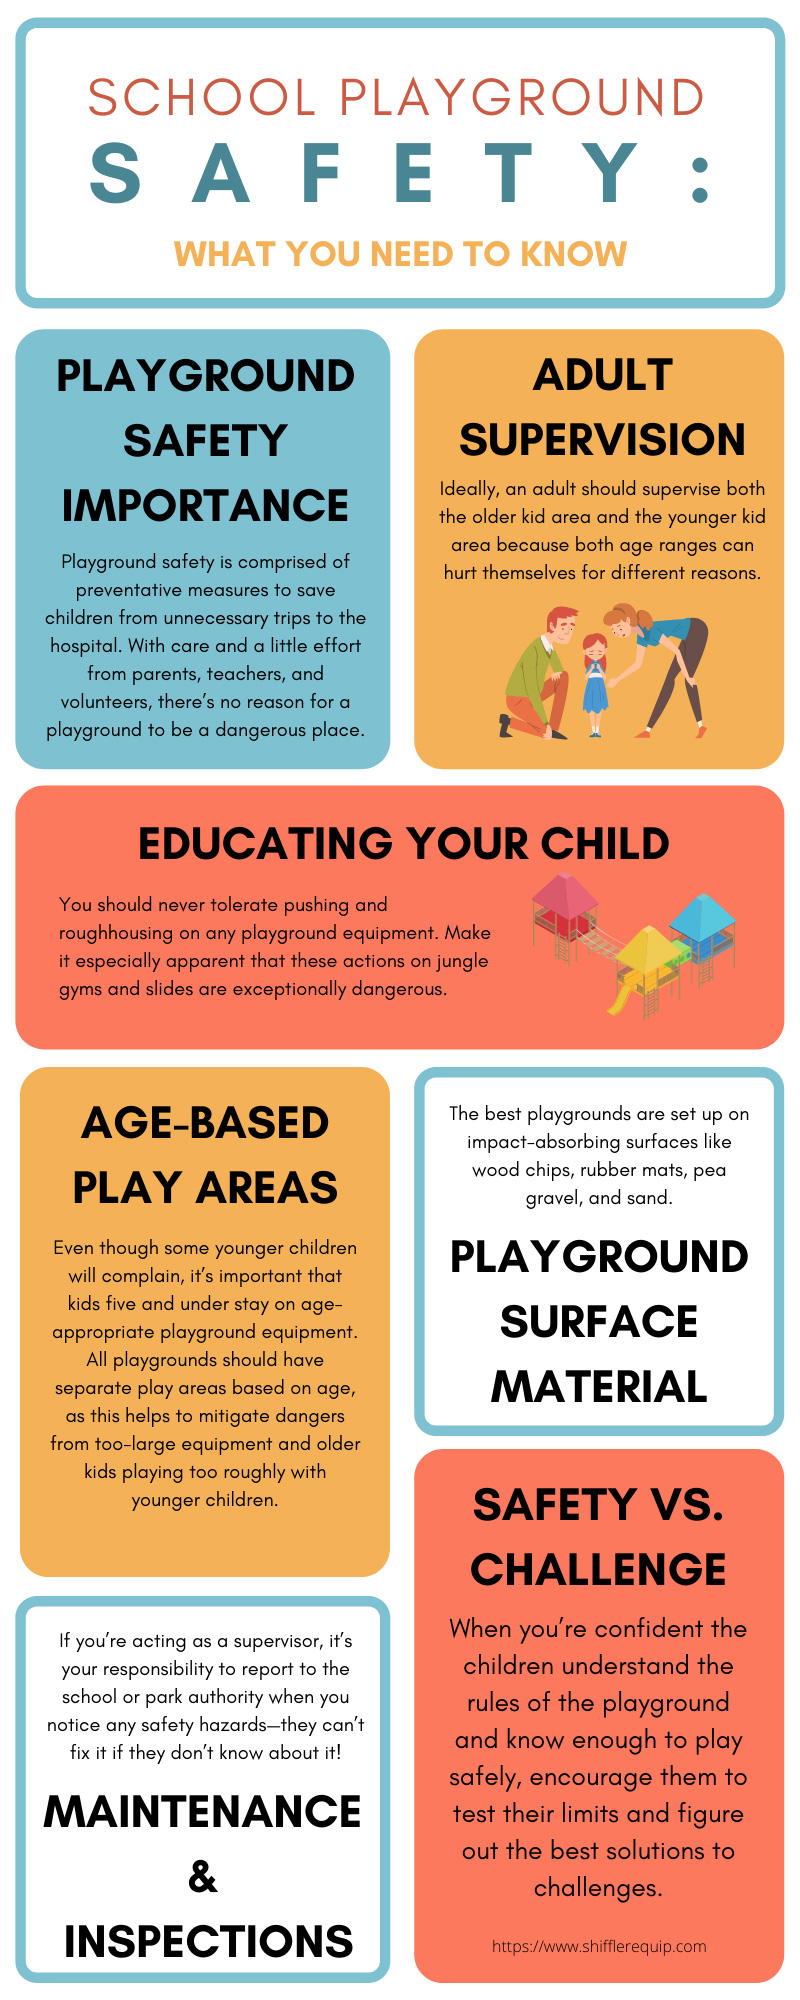 School Playground Safety: What You Need To Know